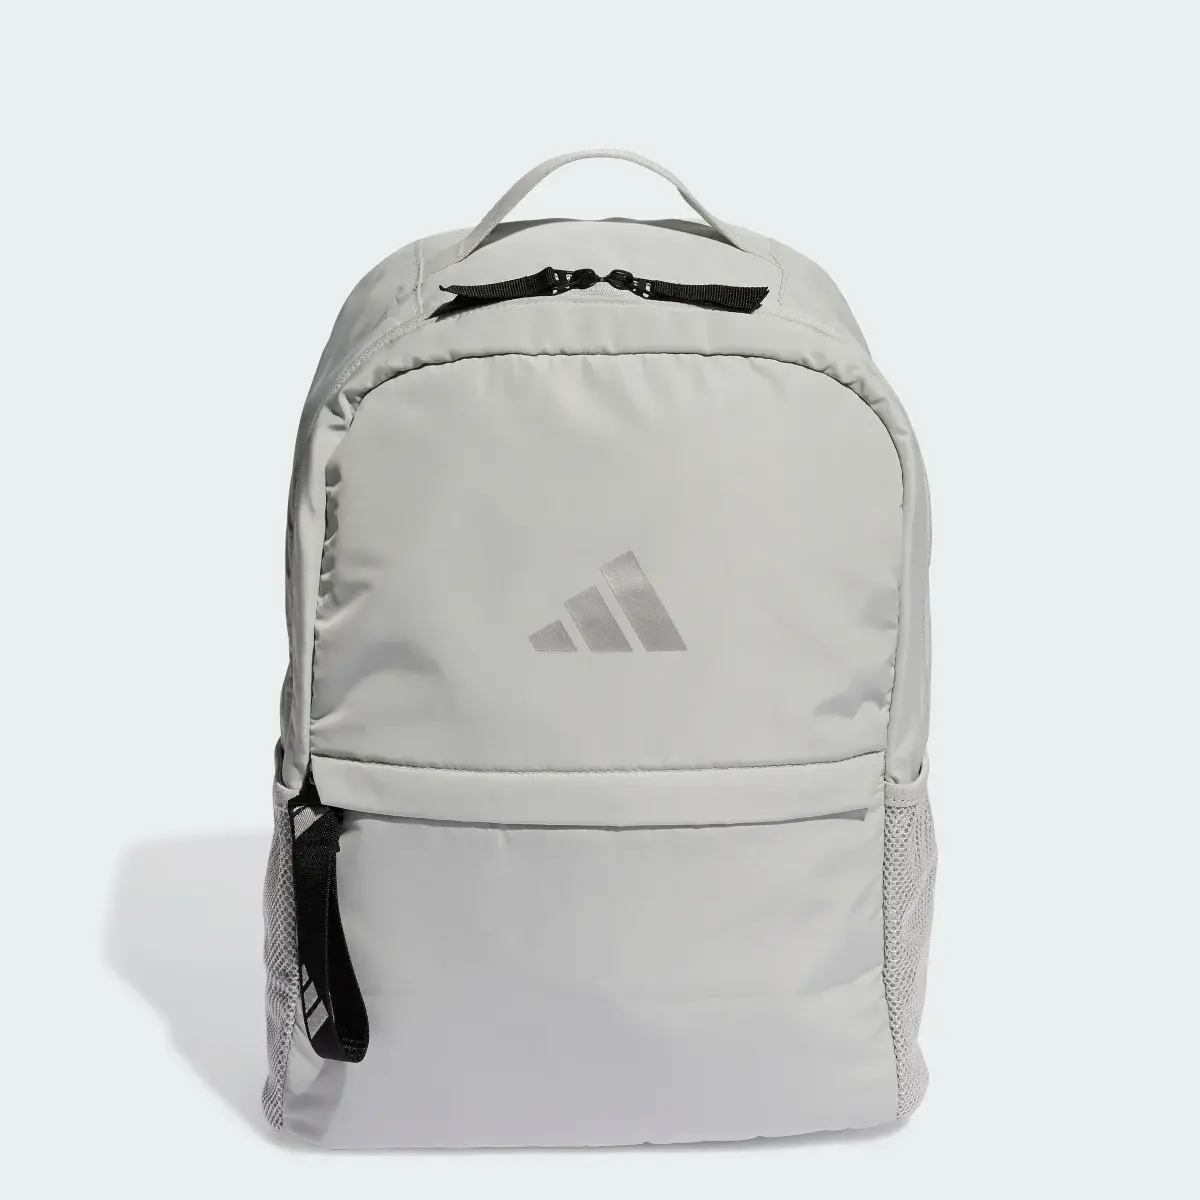 Adidas Sport Padded Backpack. 1